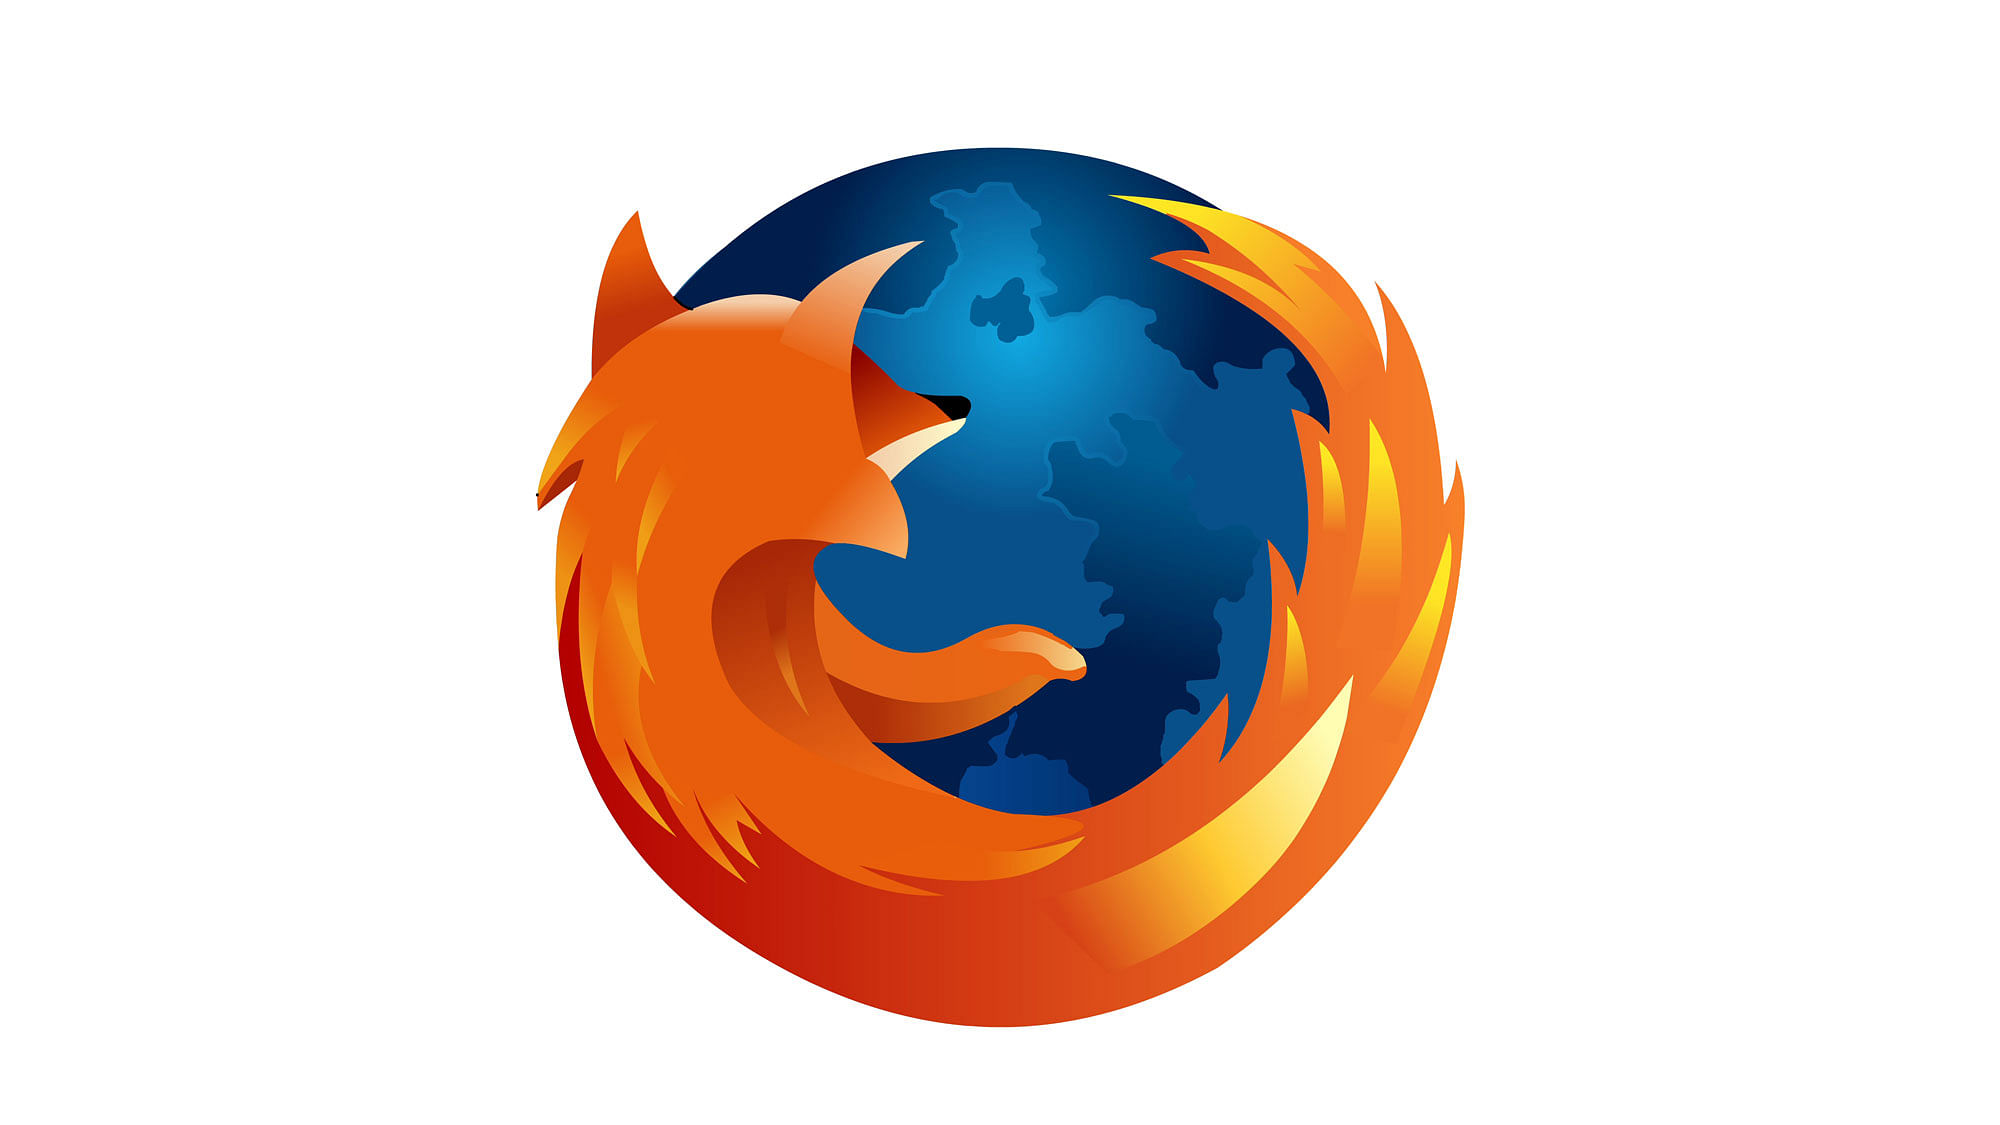 Firefox for iPhone and iPad Launches on App Store - MacRumors